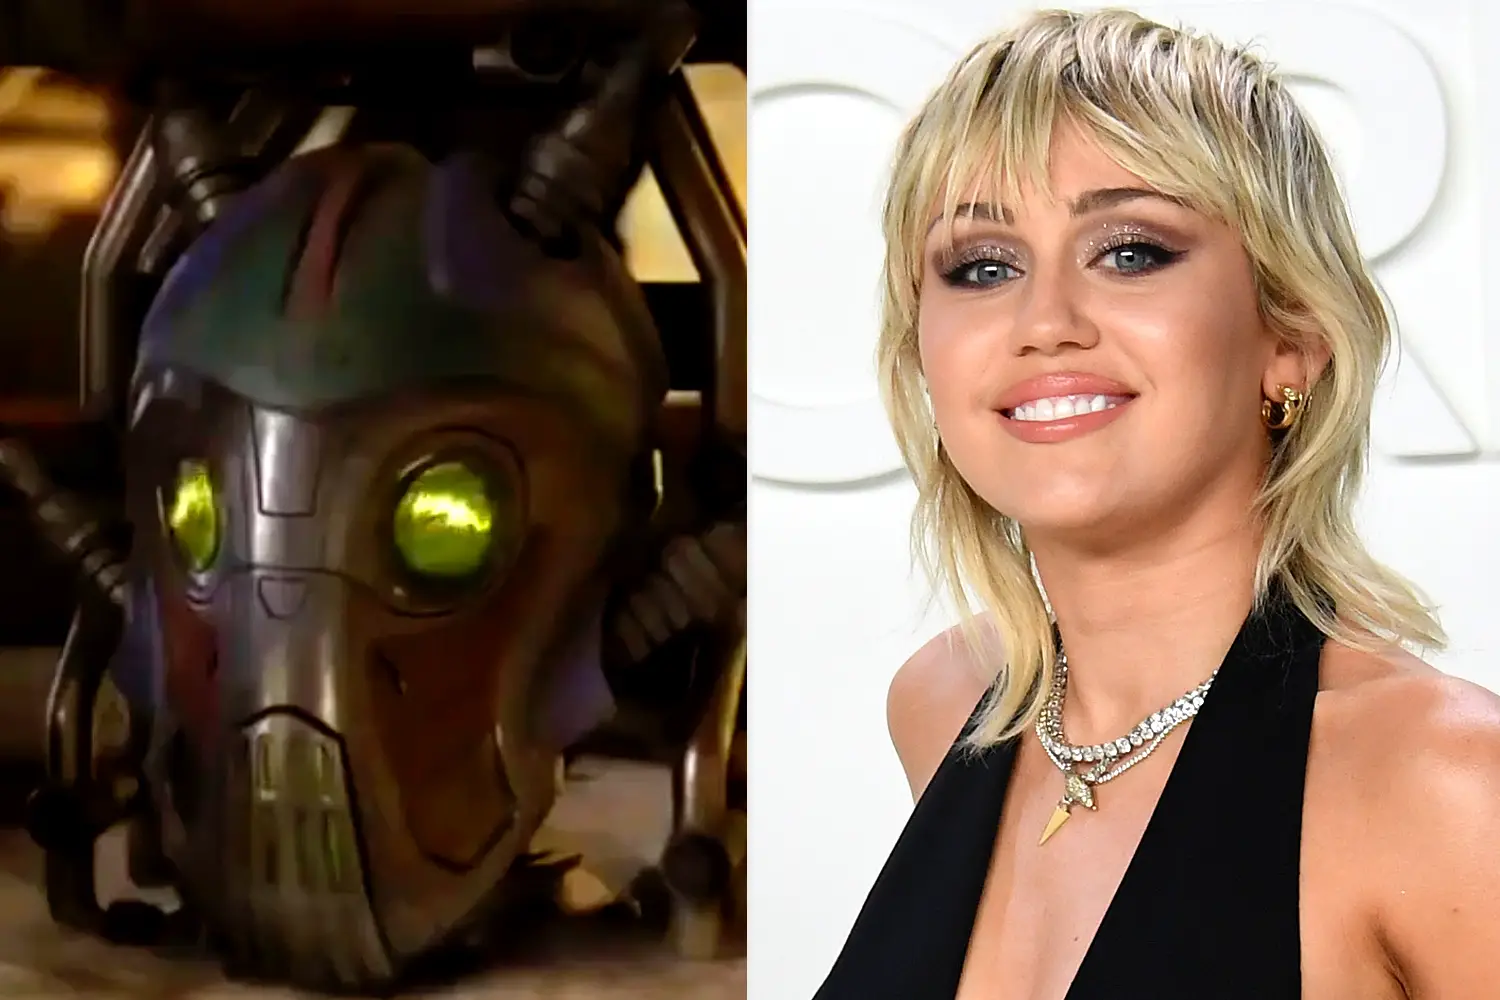 Miley Cyrus as Mainframe in Guardians of the Galaxy 2